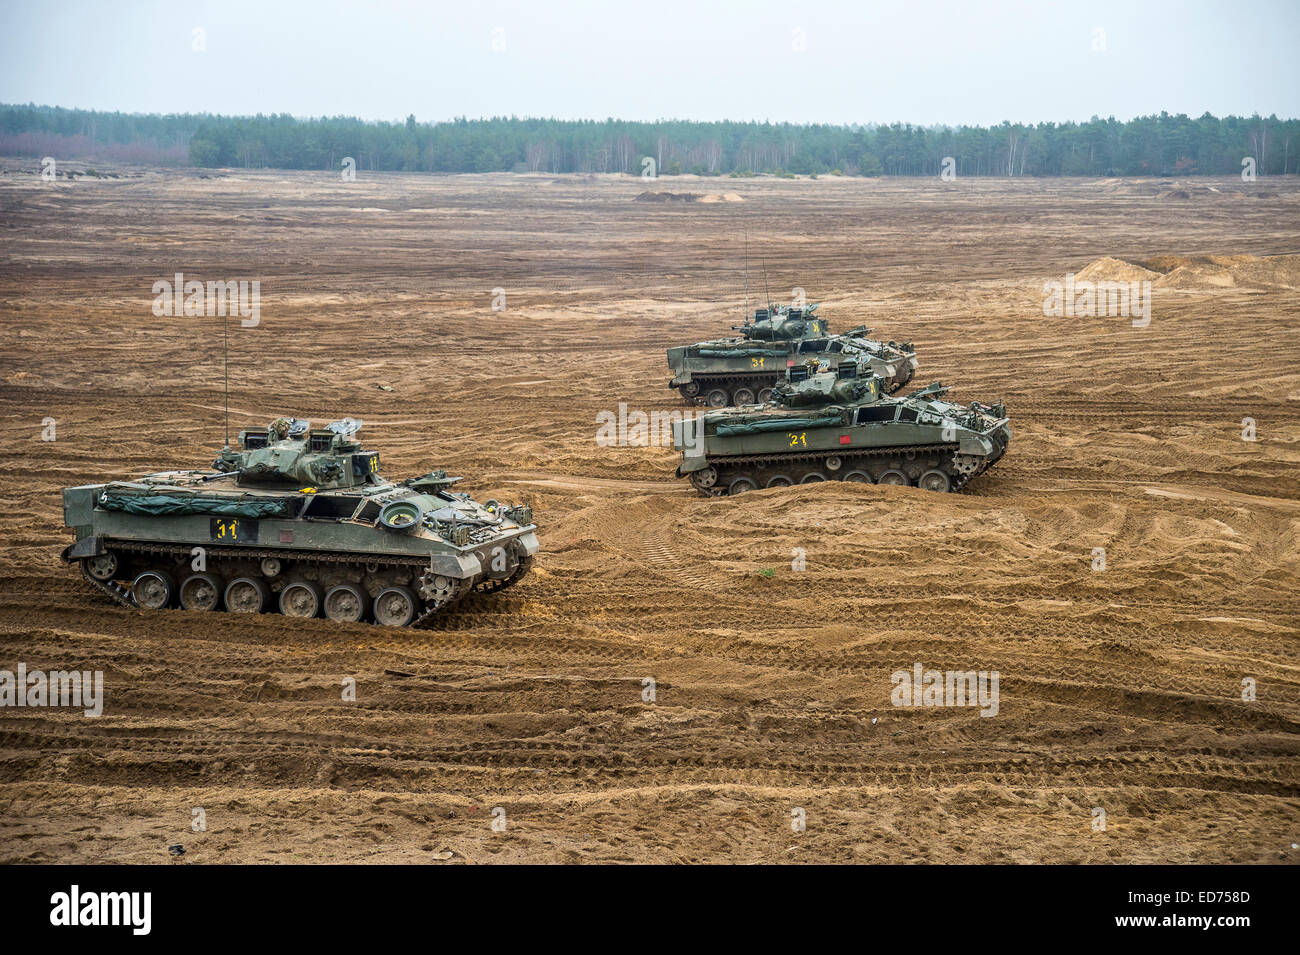 Warrior tracked infantry fighting vehicles of the British Armed Forces during Exercise Black Eagle in Poland. Stock Photo